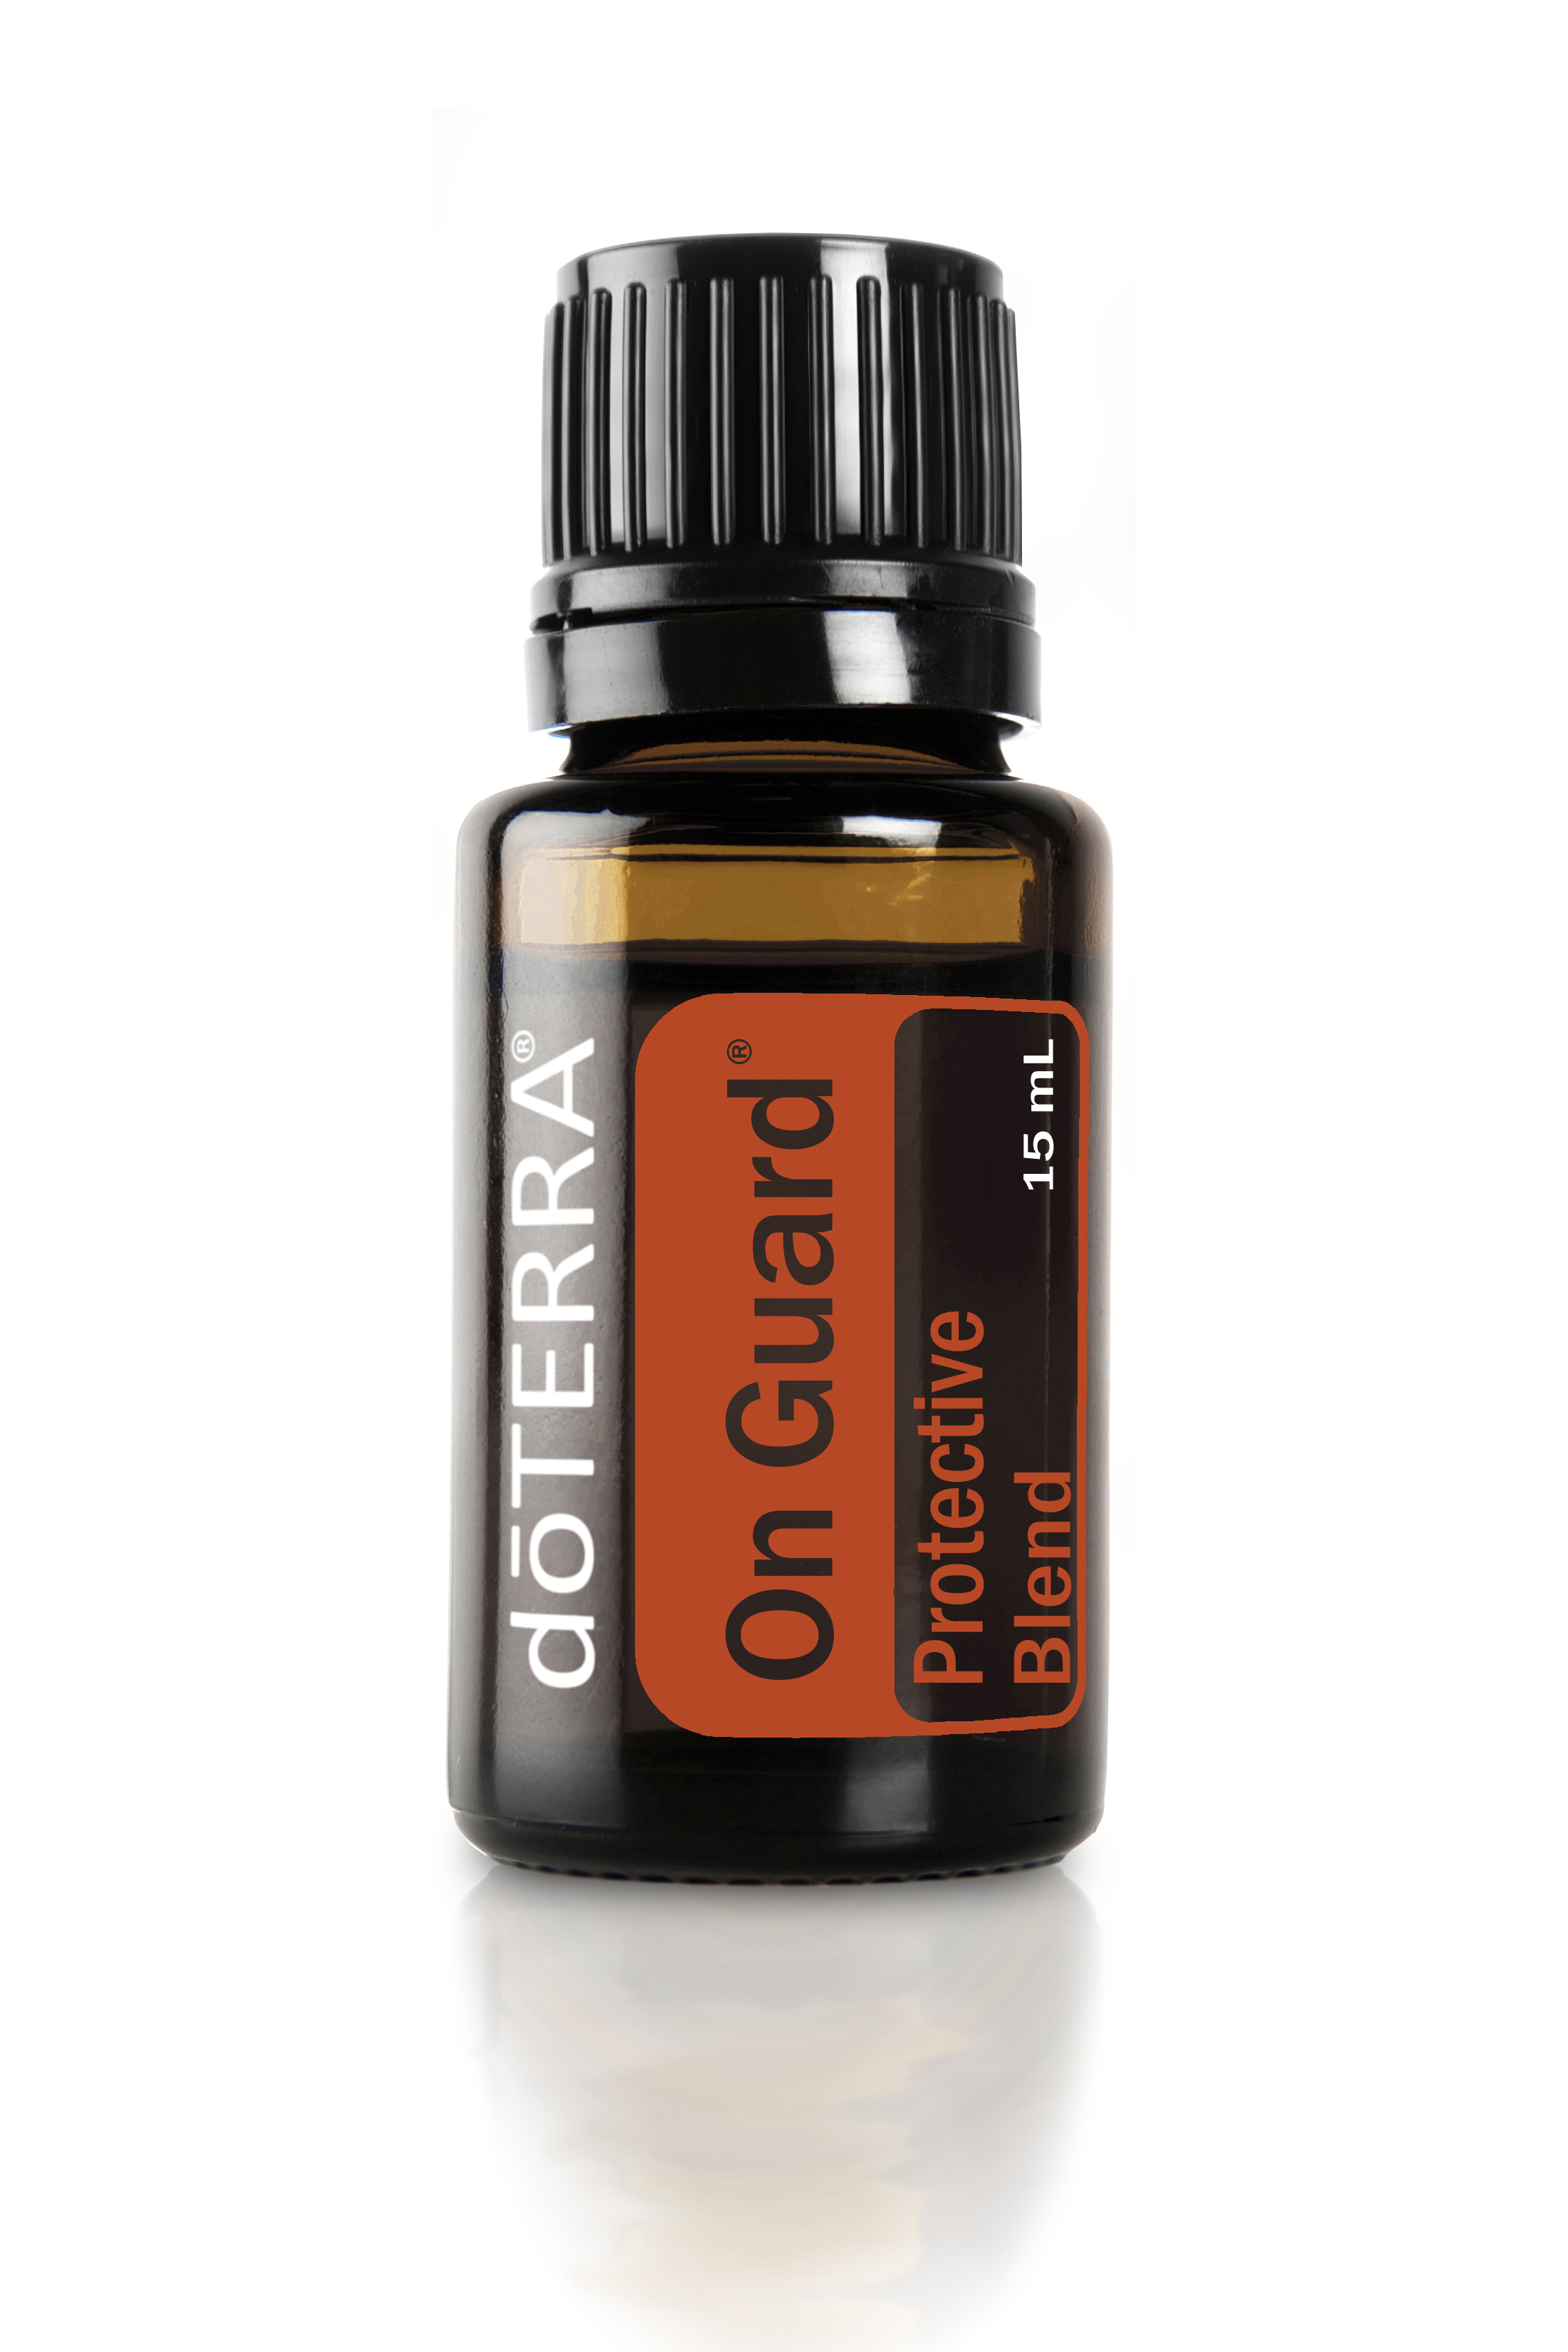 doterra on guard safe for dogs